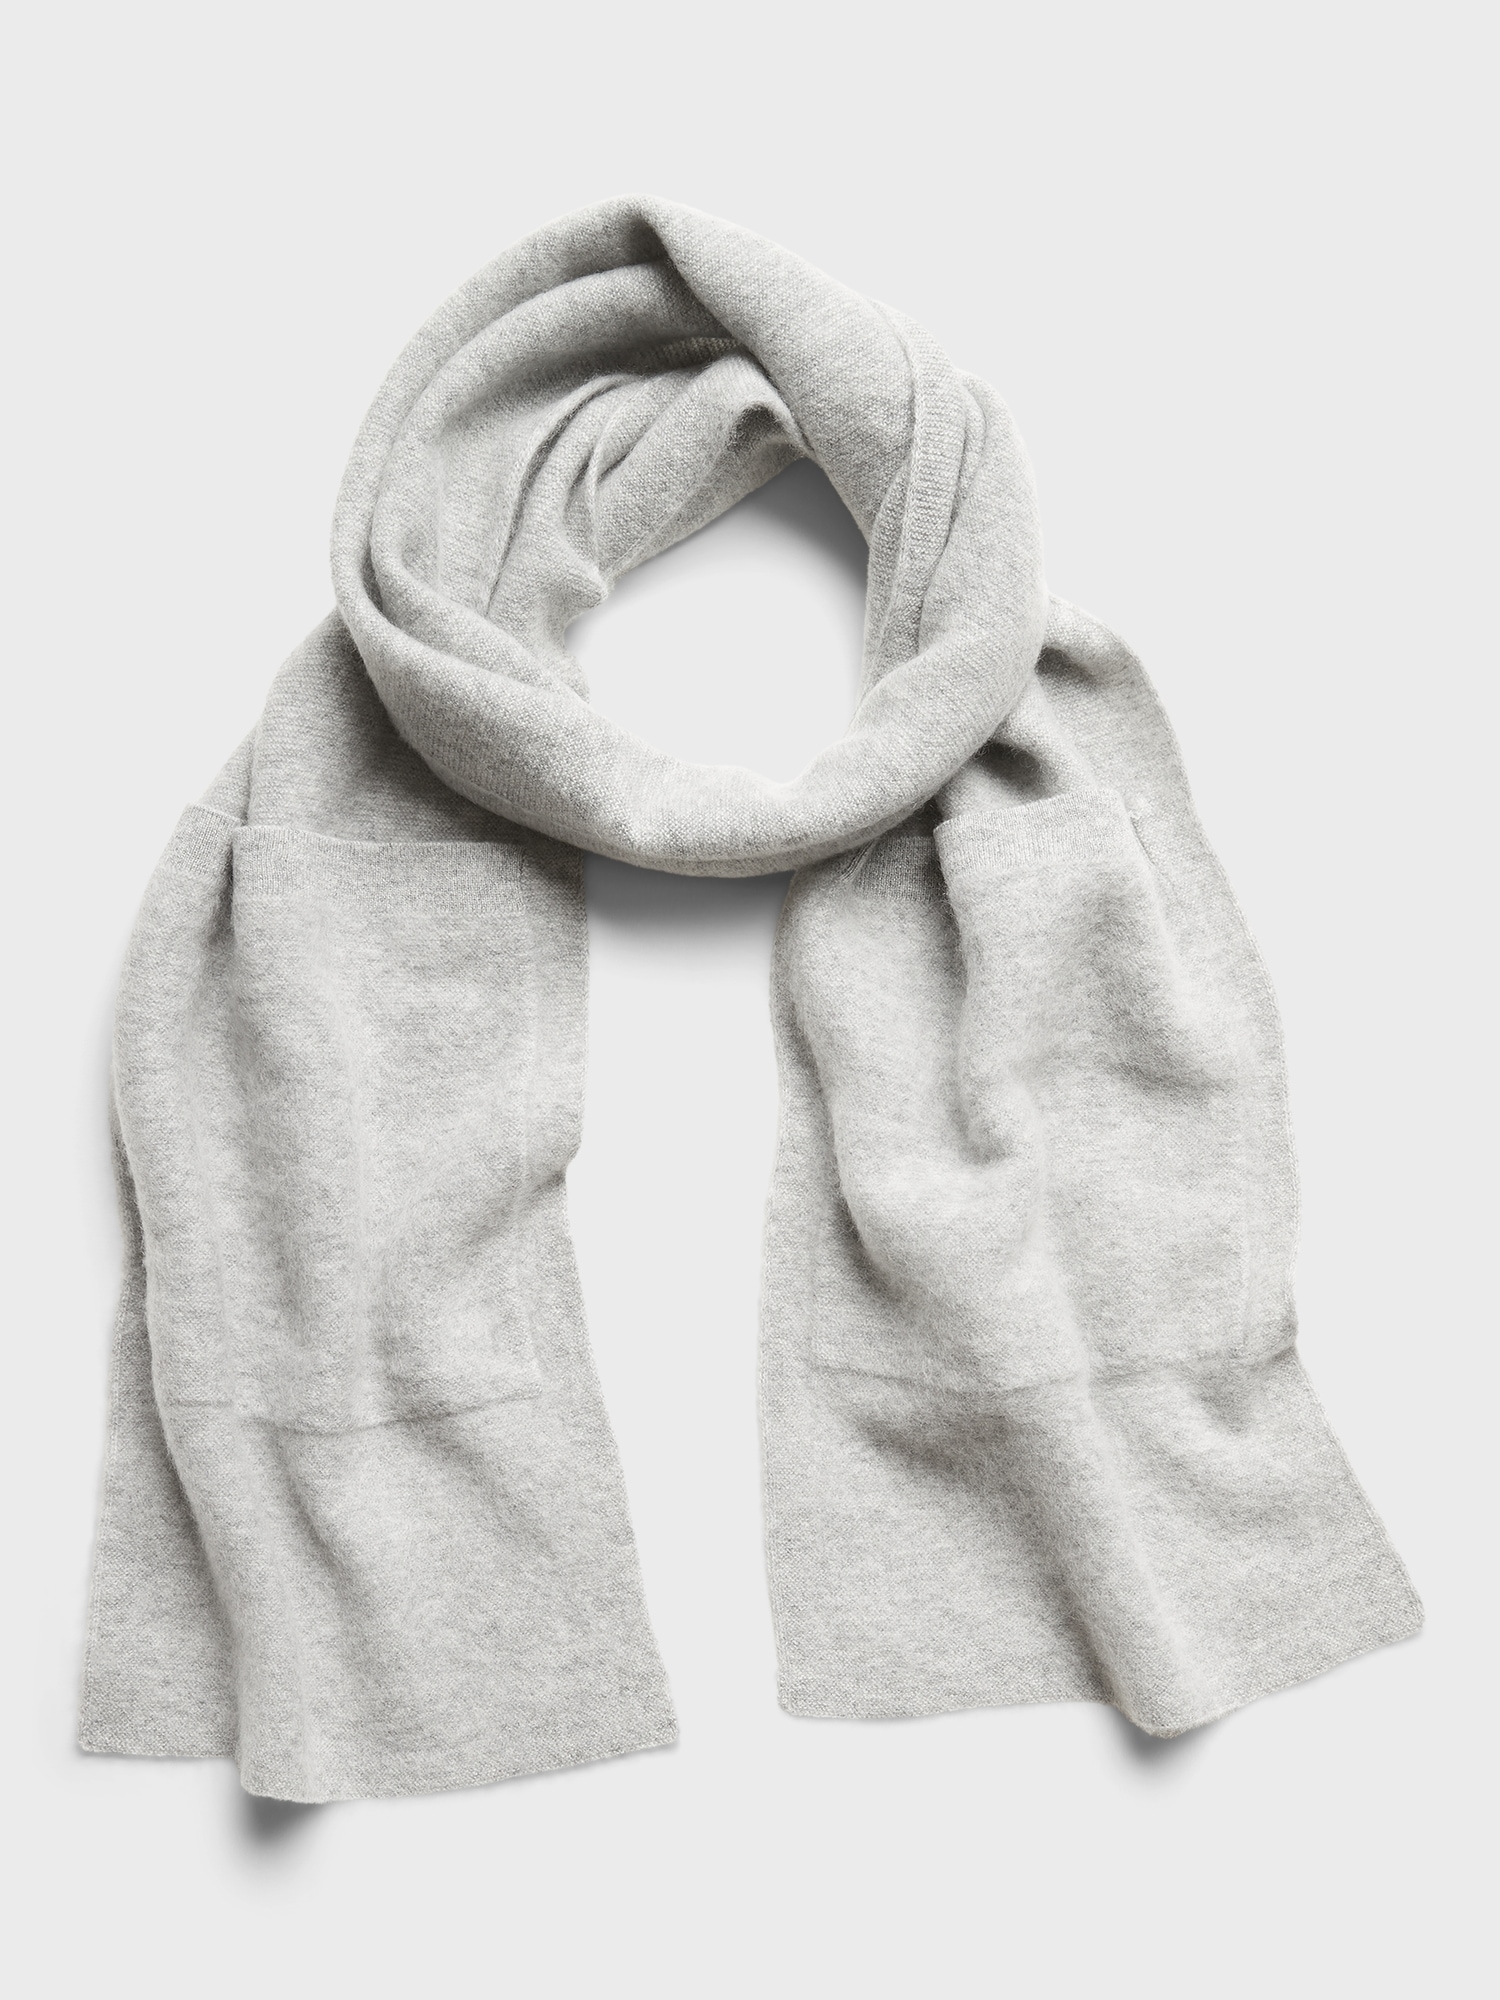 Brushed Cashmere Scarf with Pockets | Banana Republic